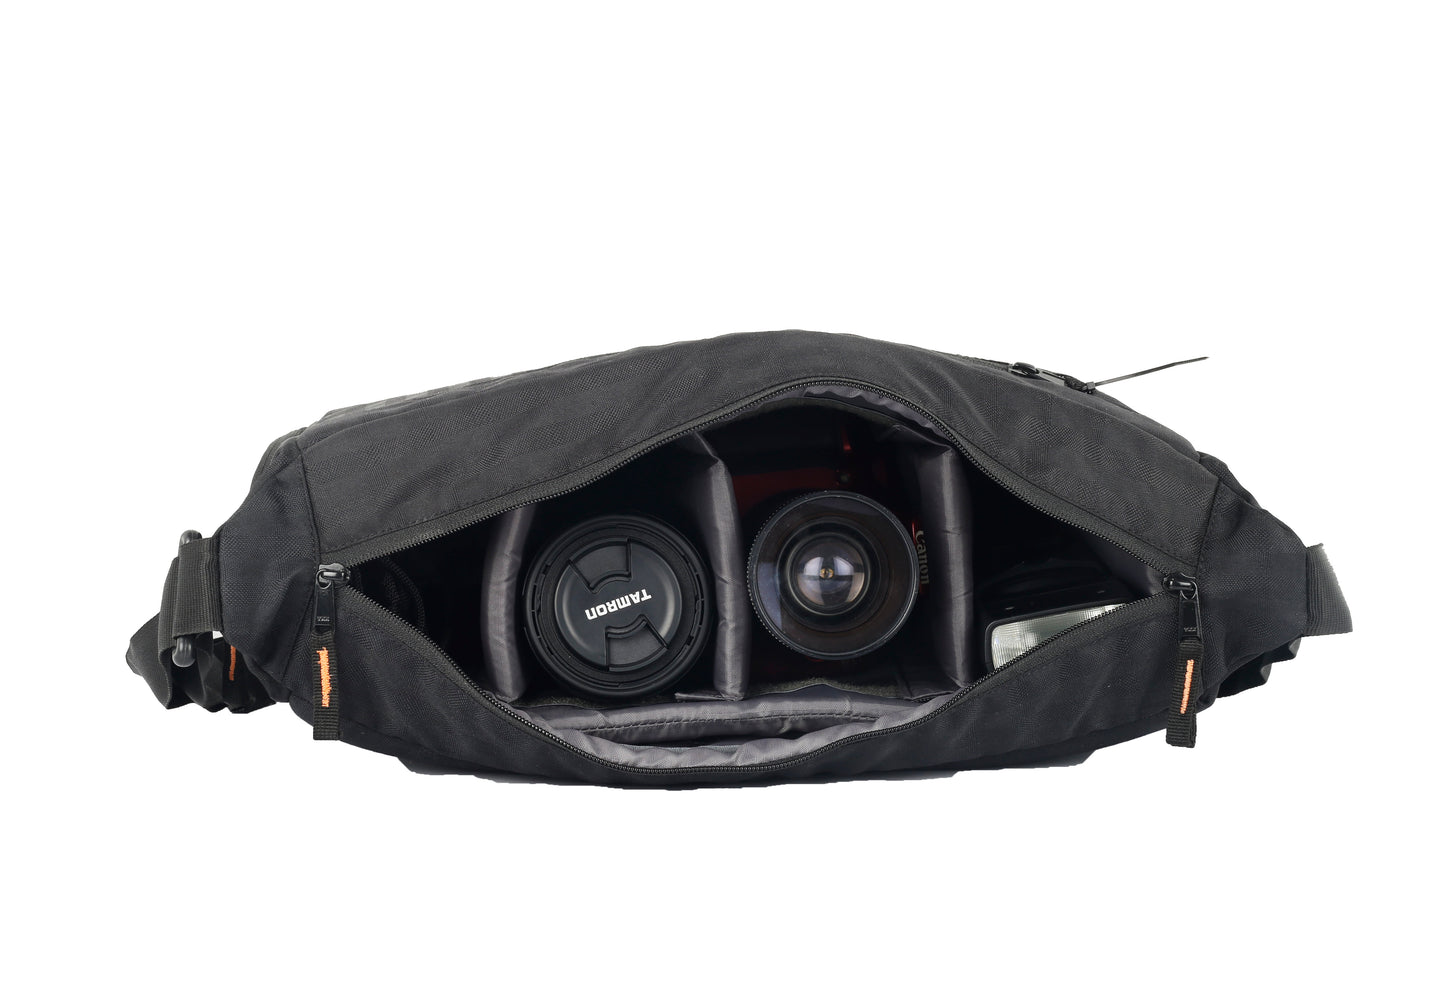 Image: Top view of the P49 Lens Pro sling bag, revealing its interior compartments filled with lenses and photography equipment. The bag's customizable dividers ensure secure and organized storage for your gear, allowing you to easily access and protect your valuable lenses. Stay organized and ready for your photography adventures with the P49 Lens Pro.